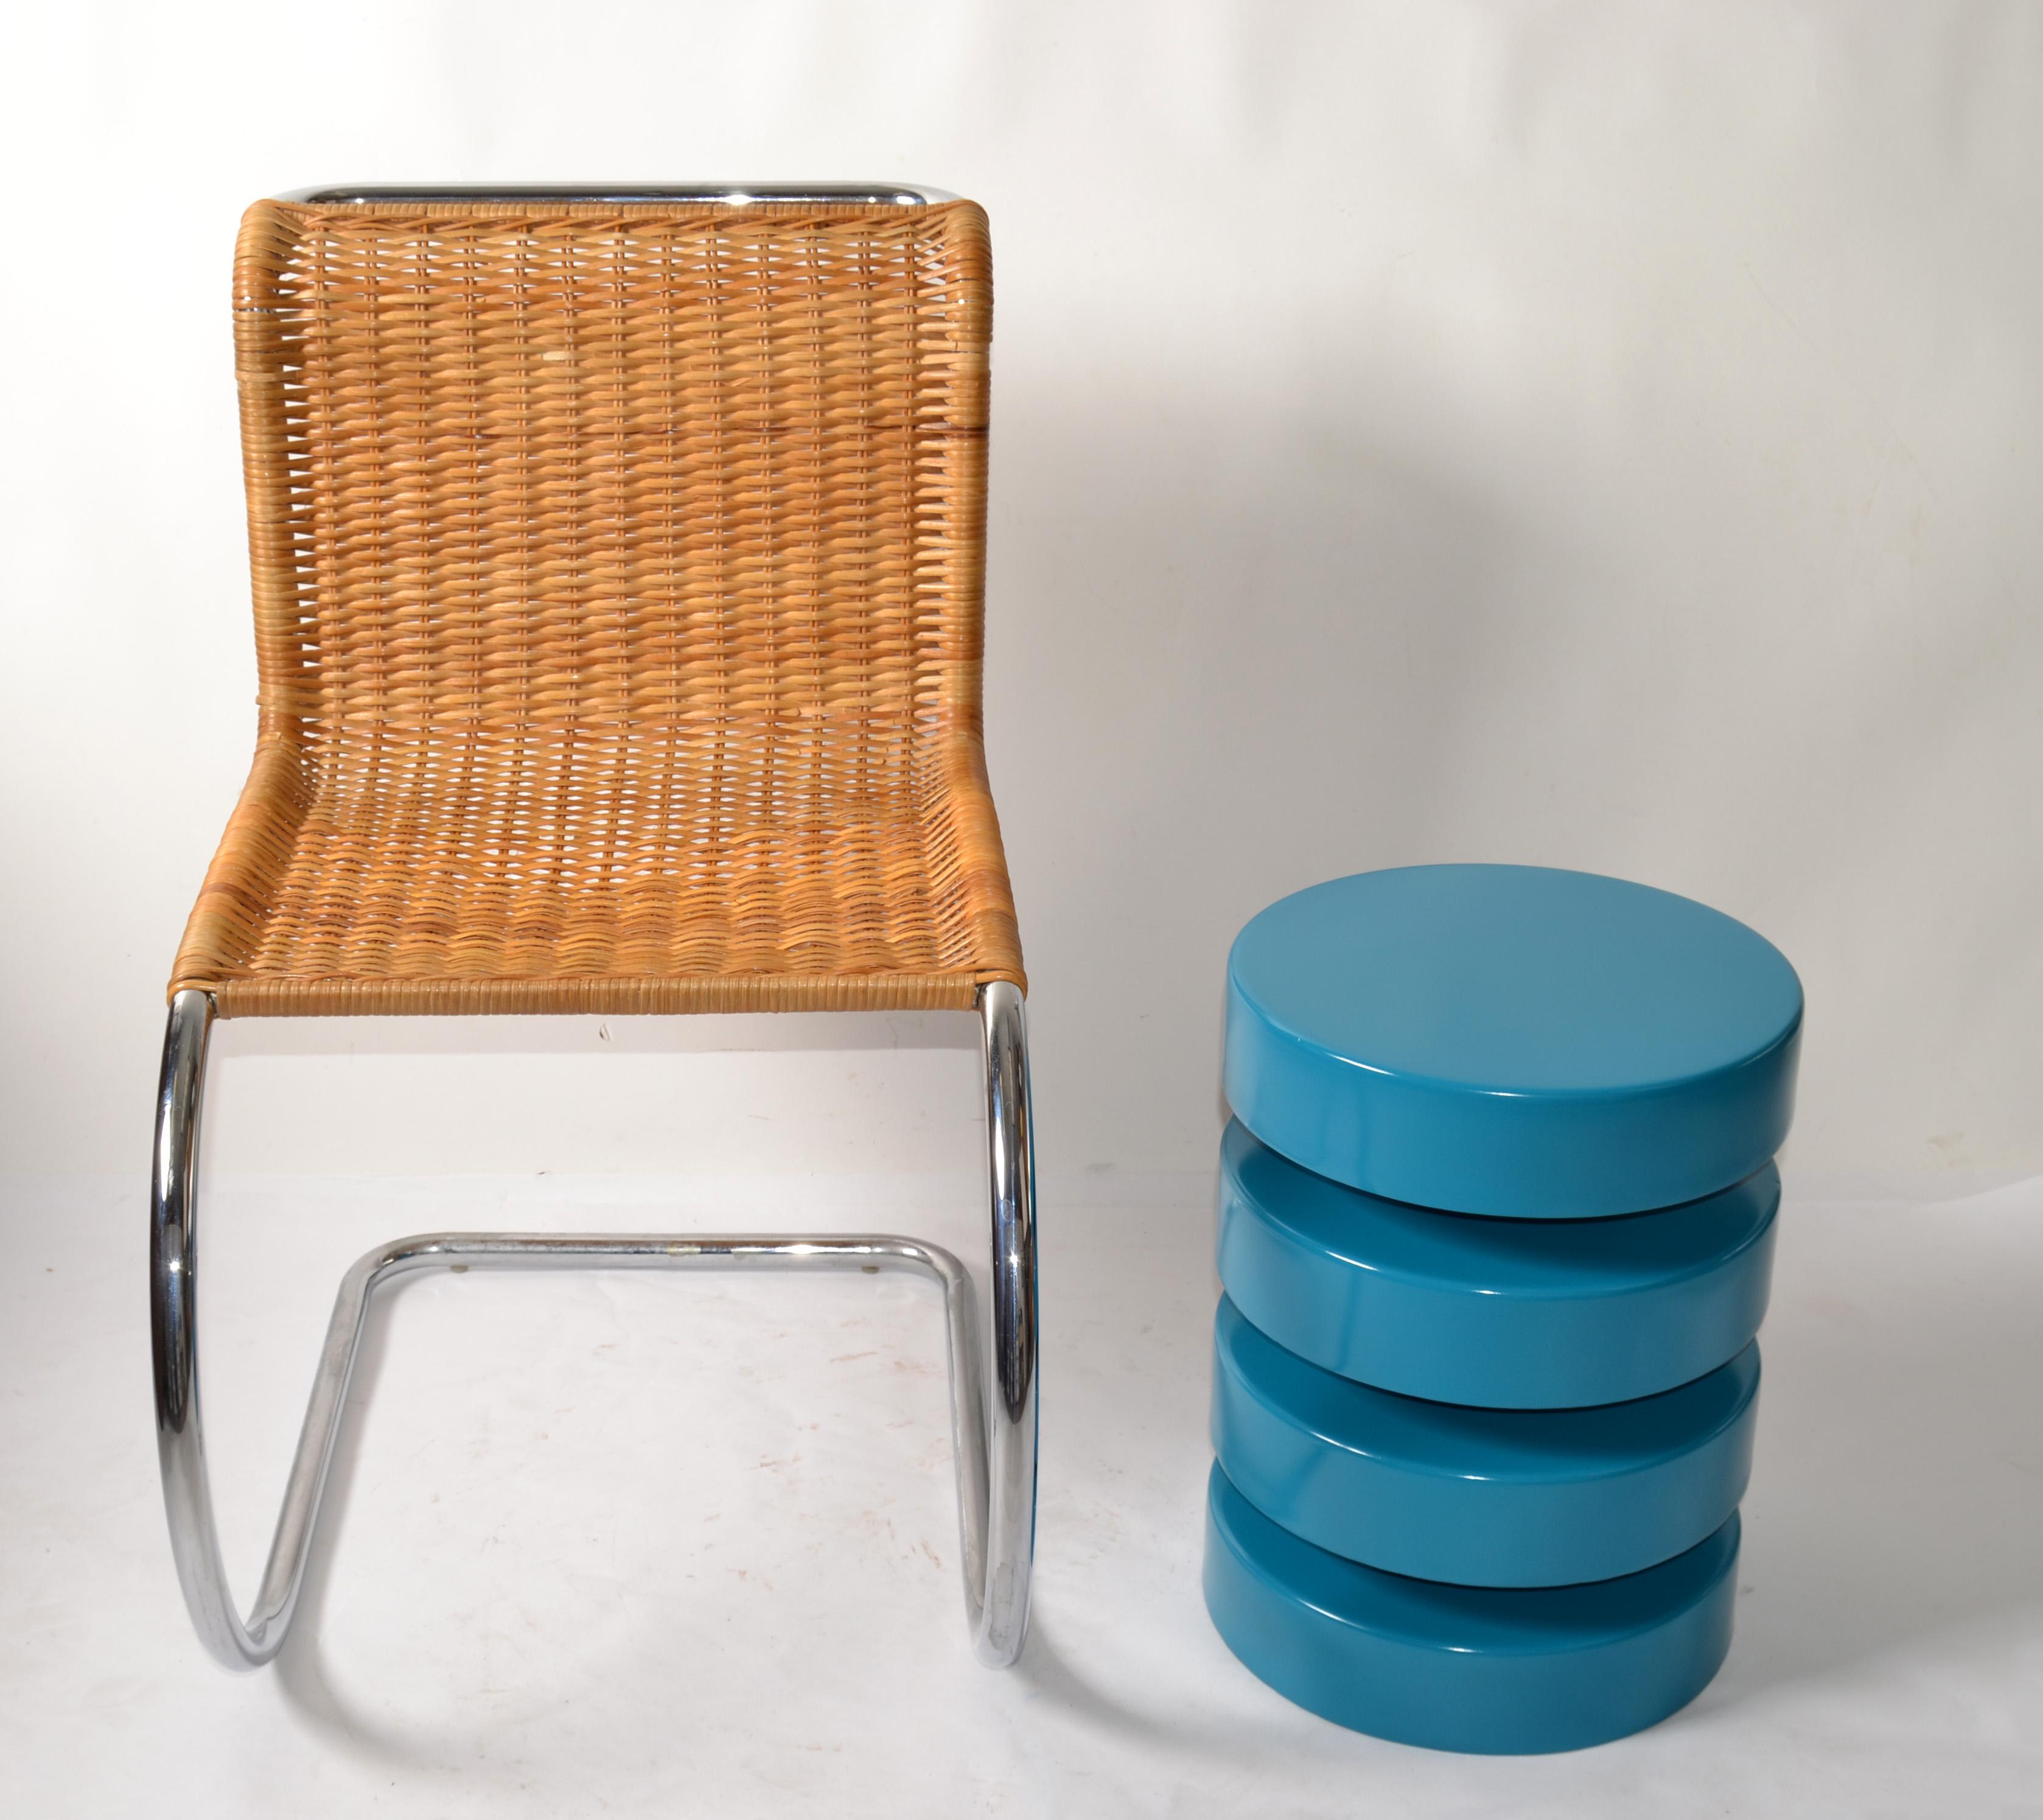 Late 20th Century Tubular Ludwig Mies van der Rohe Attributed Mr Chair Armless Woven Cane Seat 70s For Sale